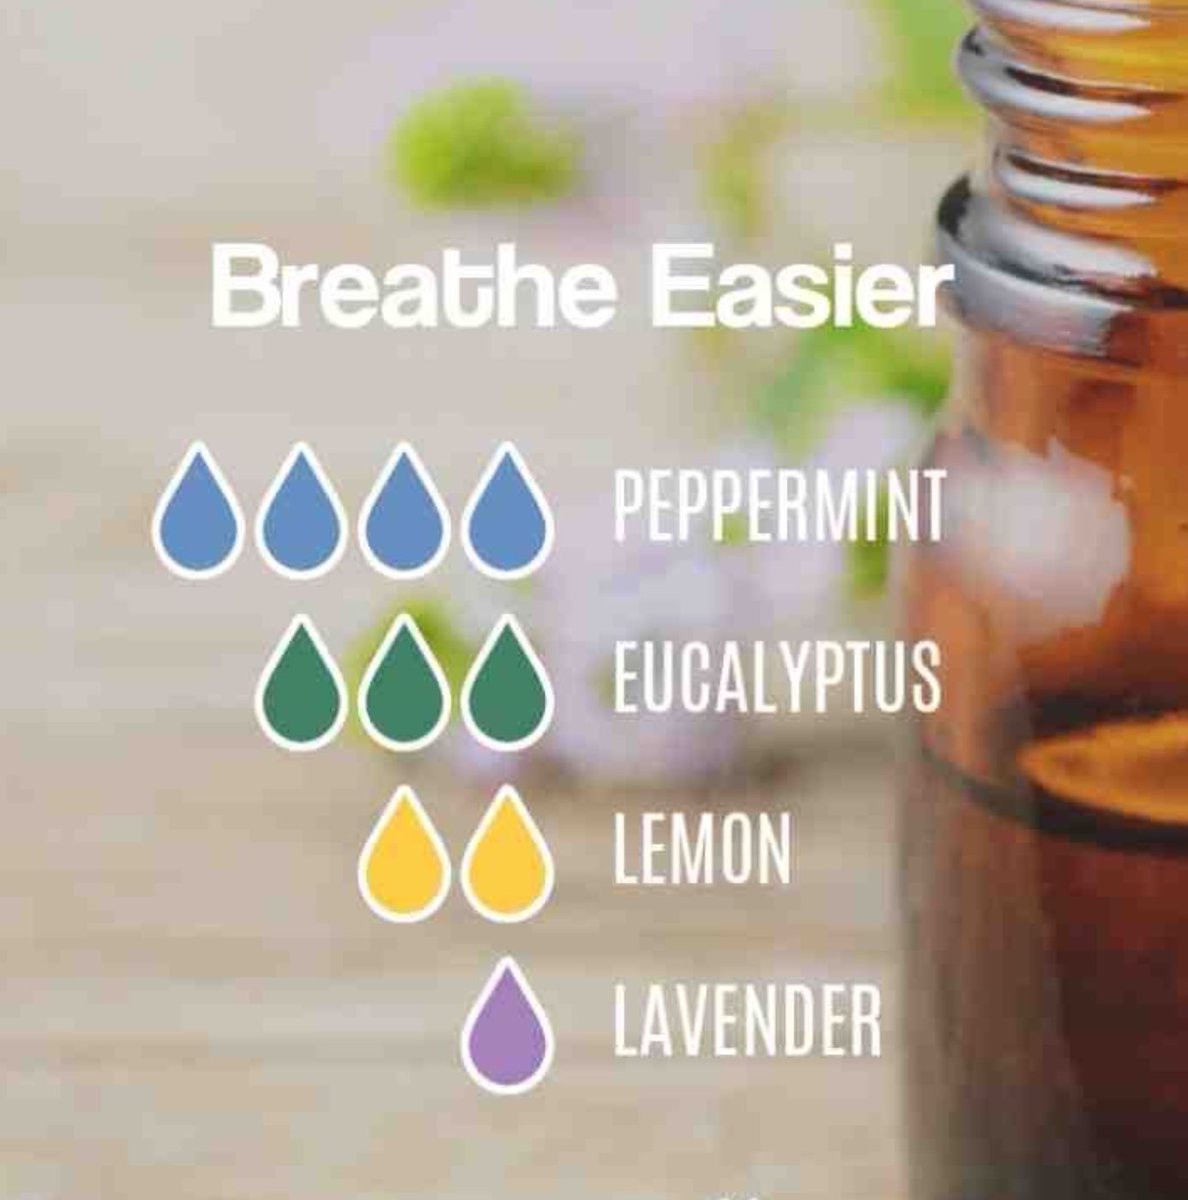 Especially with our current weather, keep this going in your diffuser! #ilovemyoils #diffuserblends #youngliving #saturdayscents #essentiallysusie